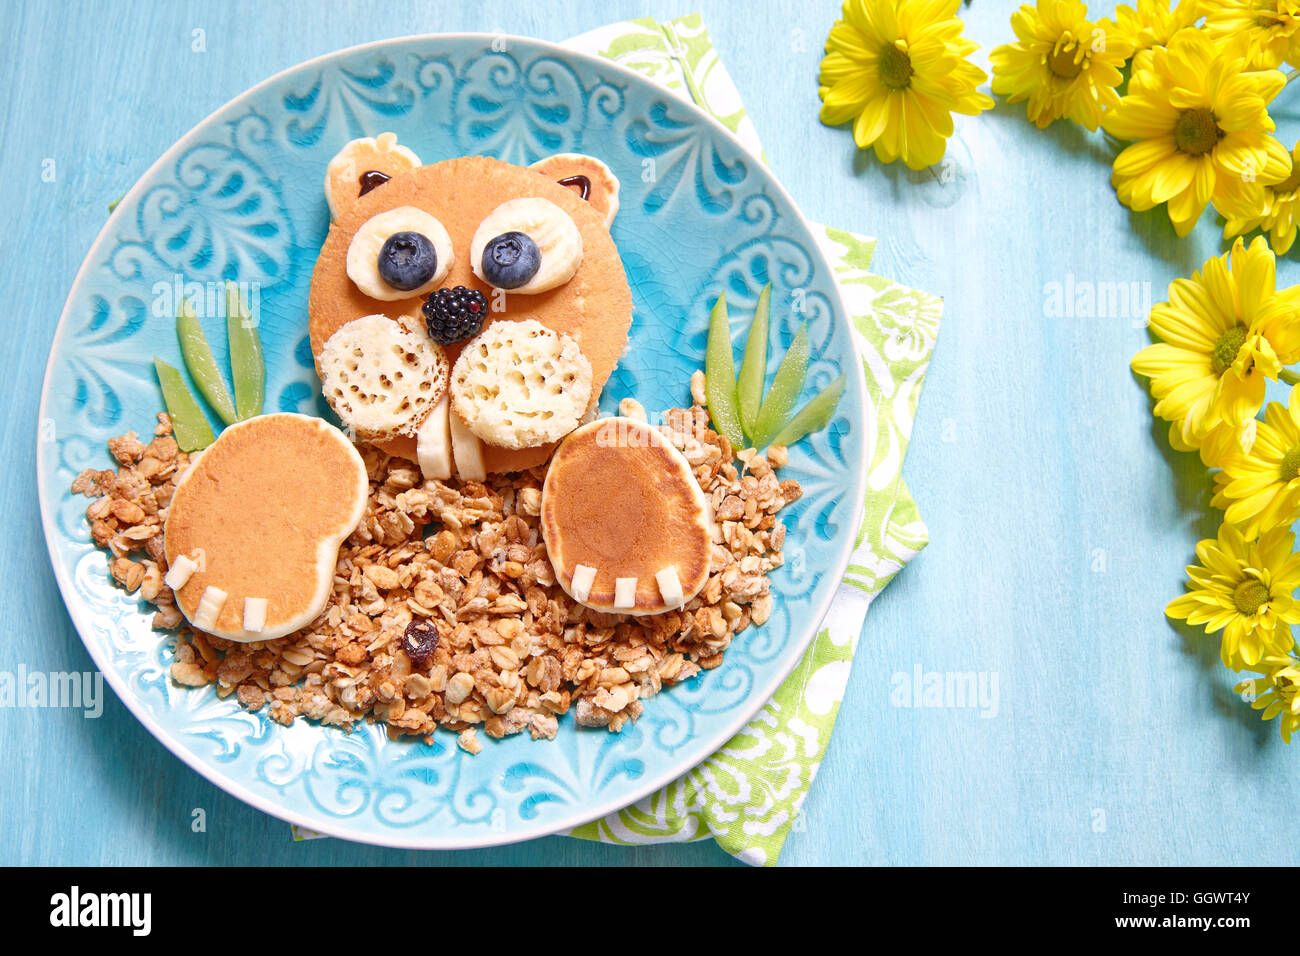 Beaver shaped pancakes with berries and granola Stock Photo